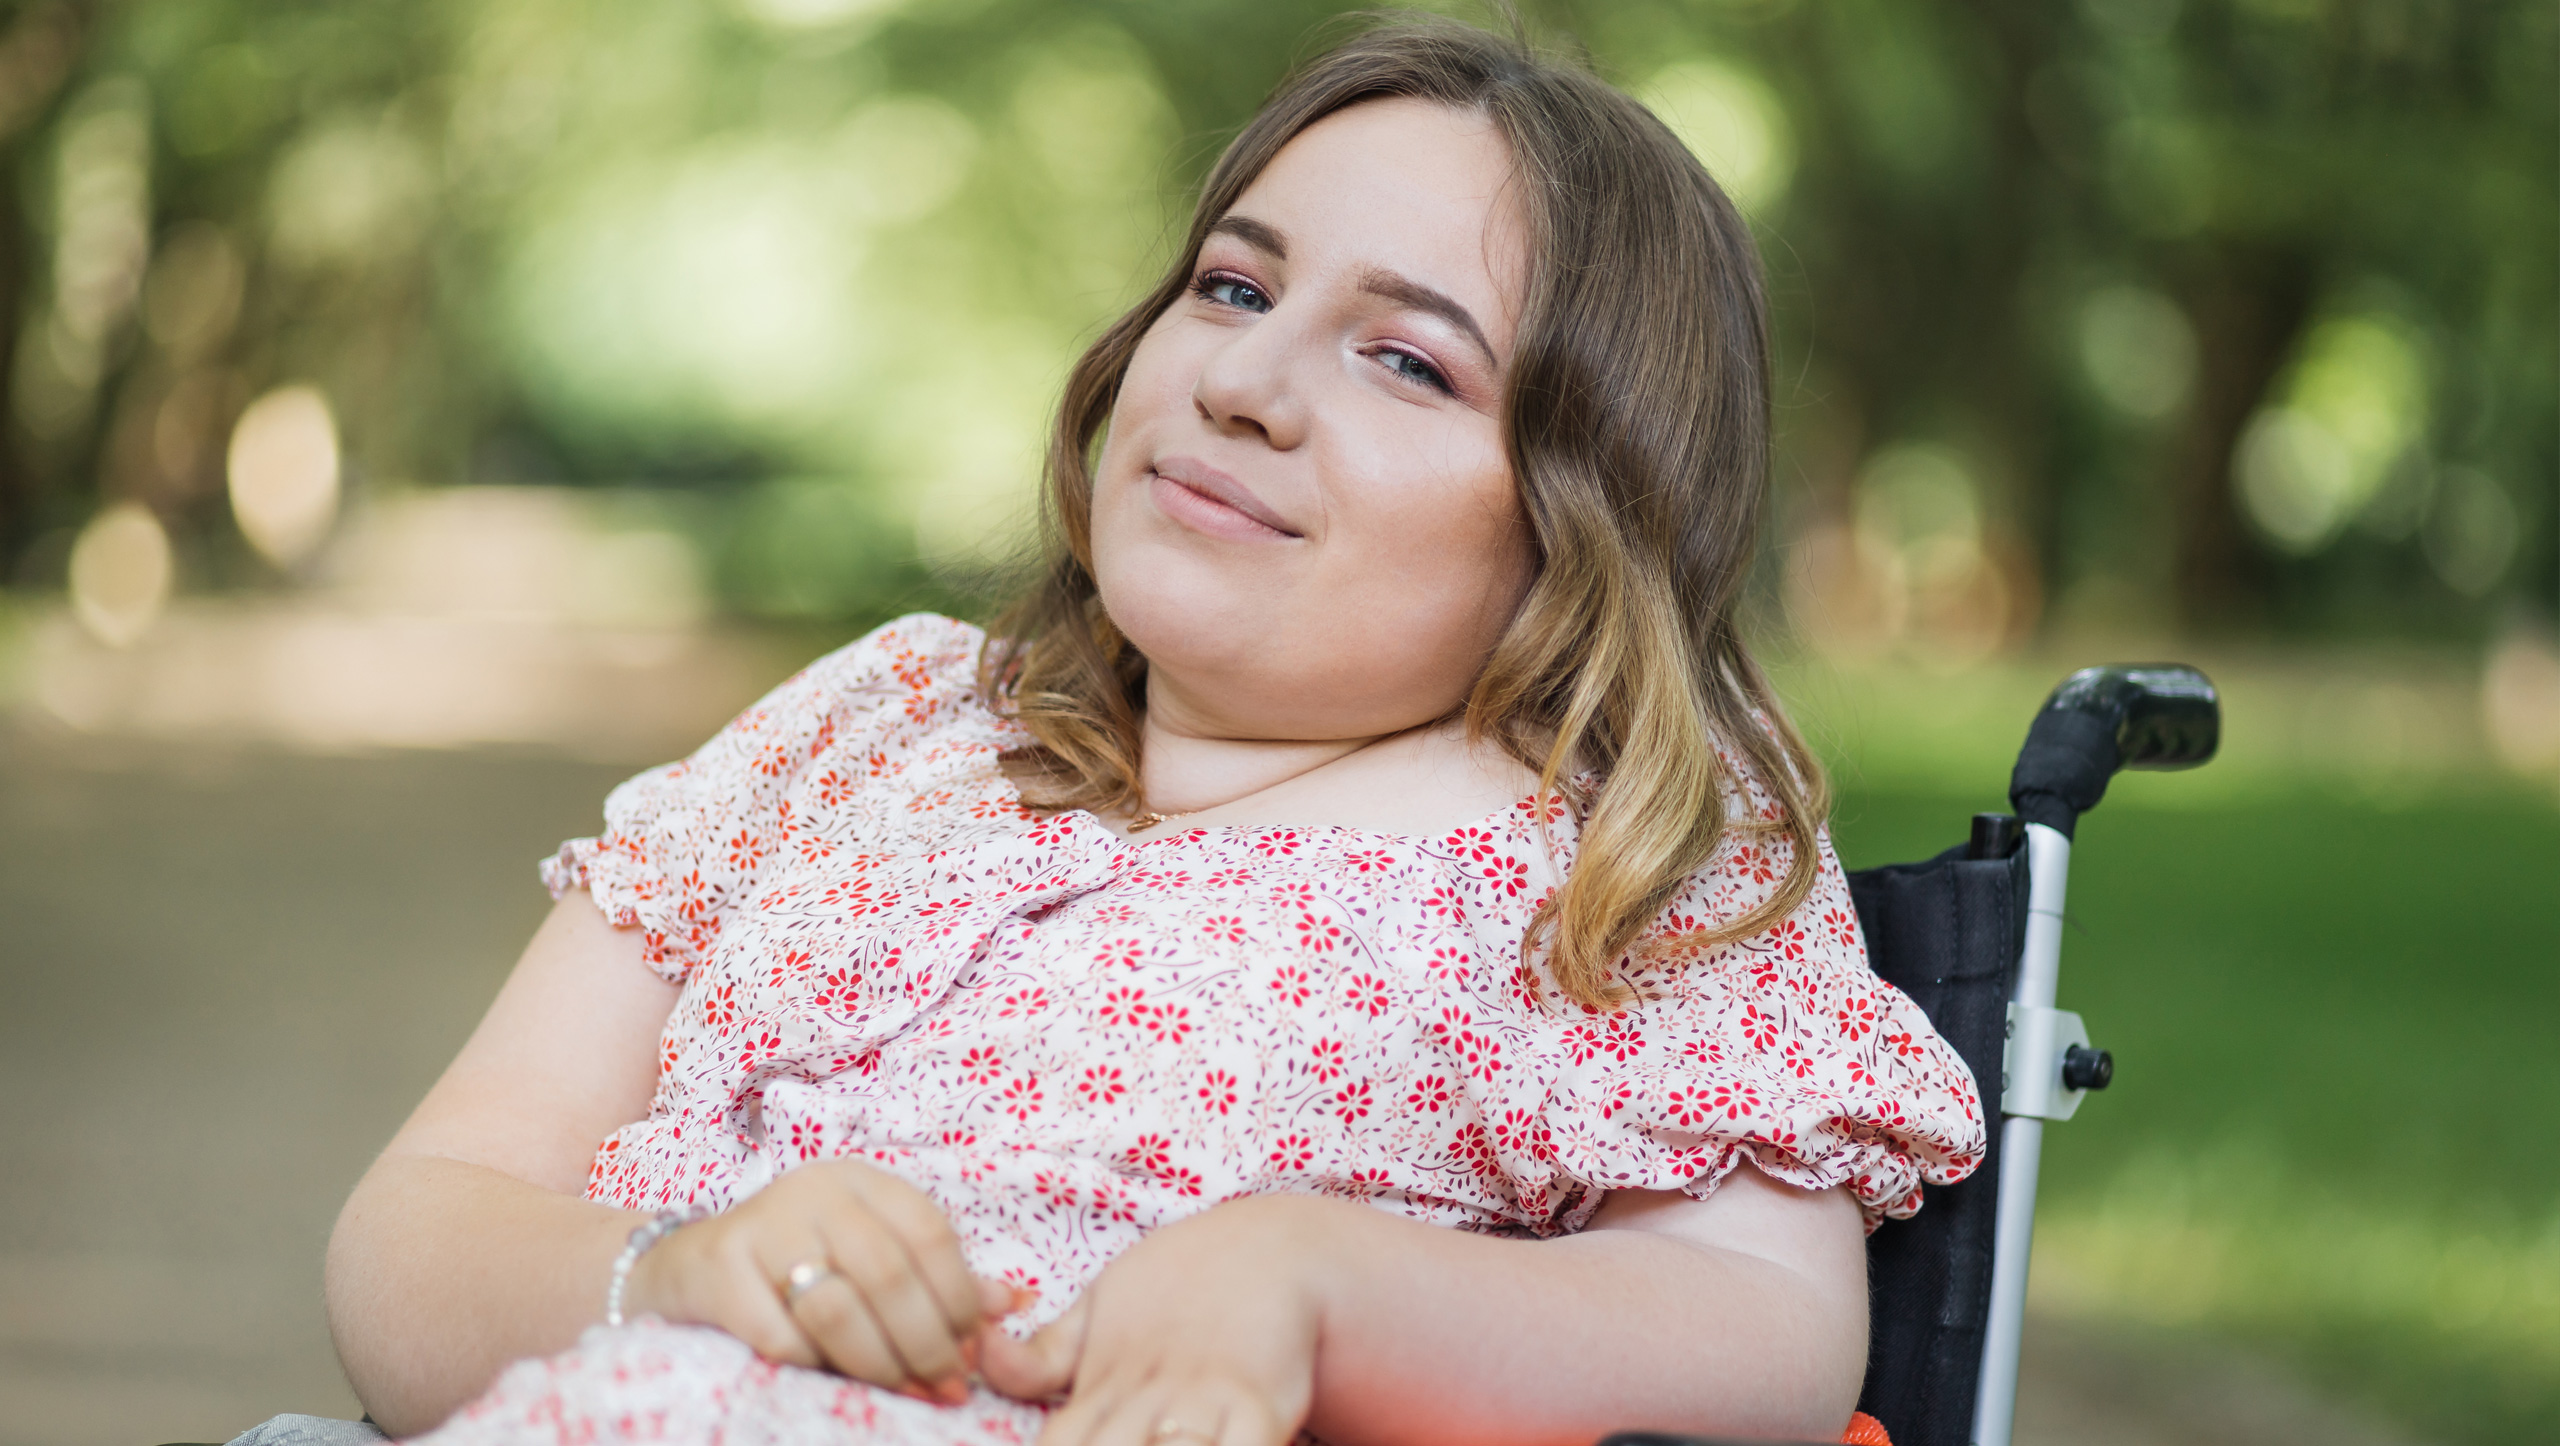 A girl sitting on a wheelchair, smiling and looking towards the camera.